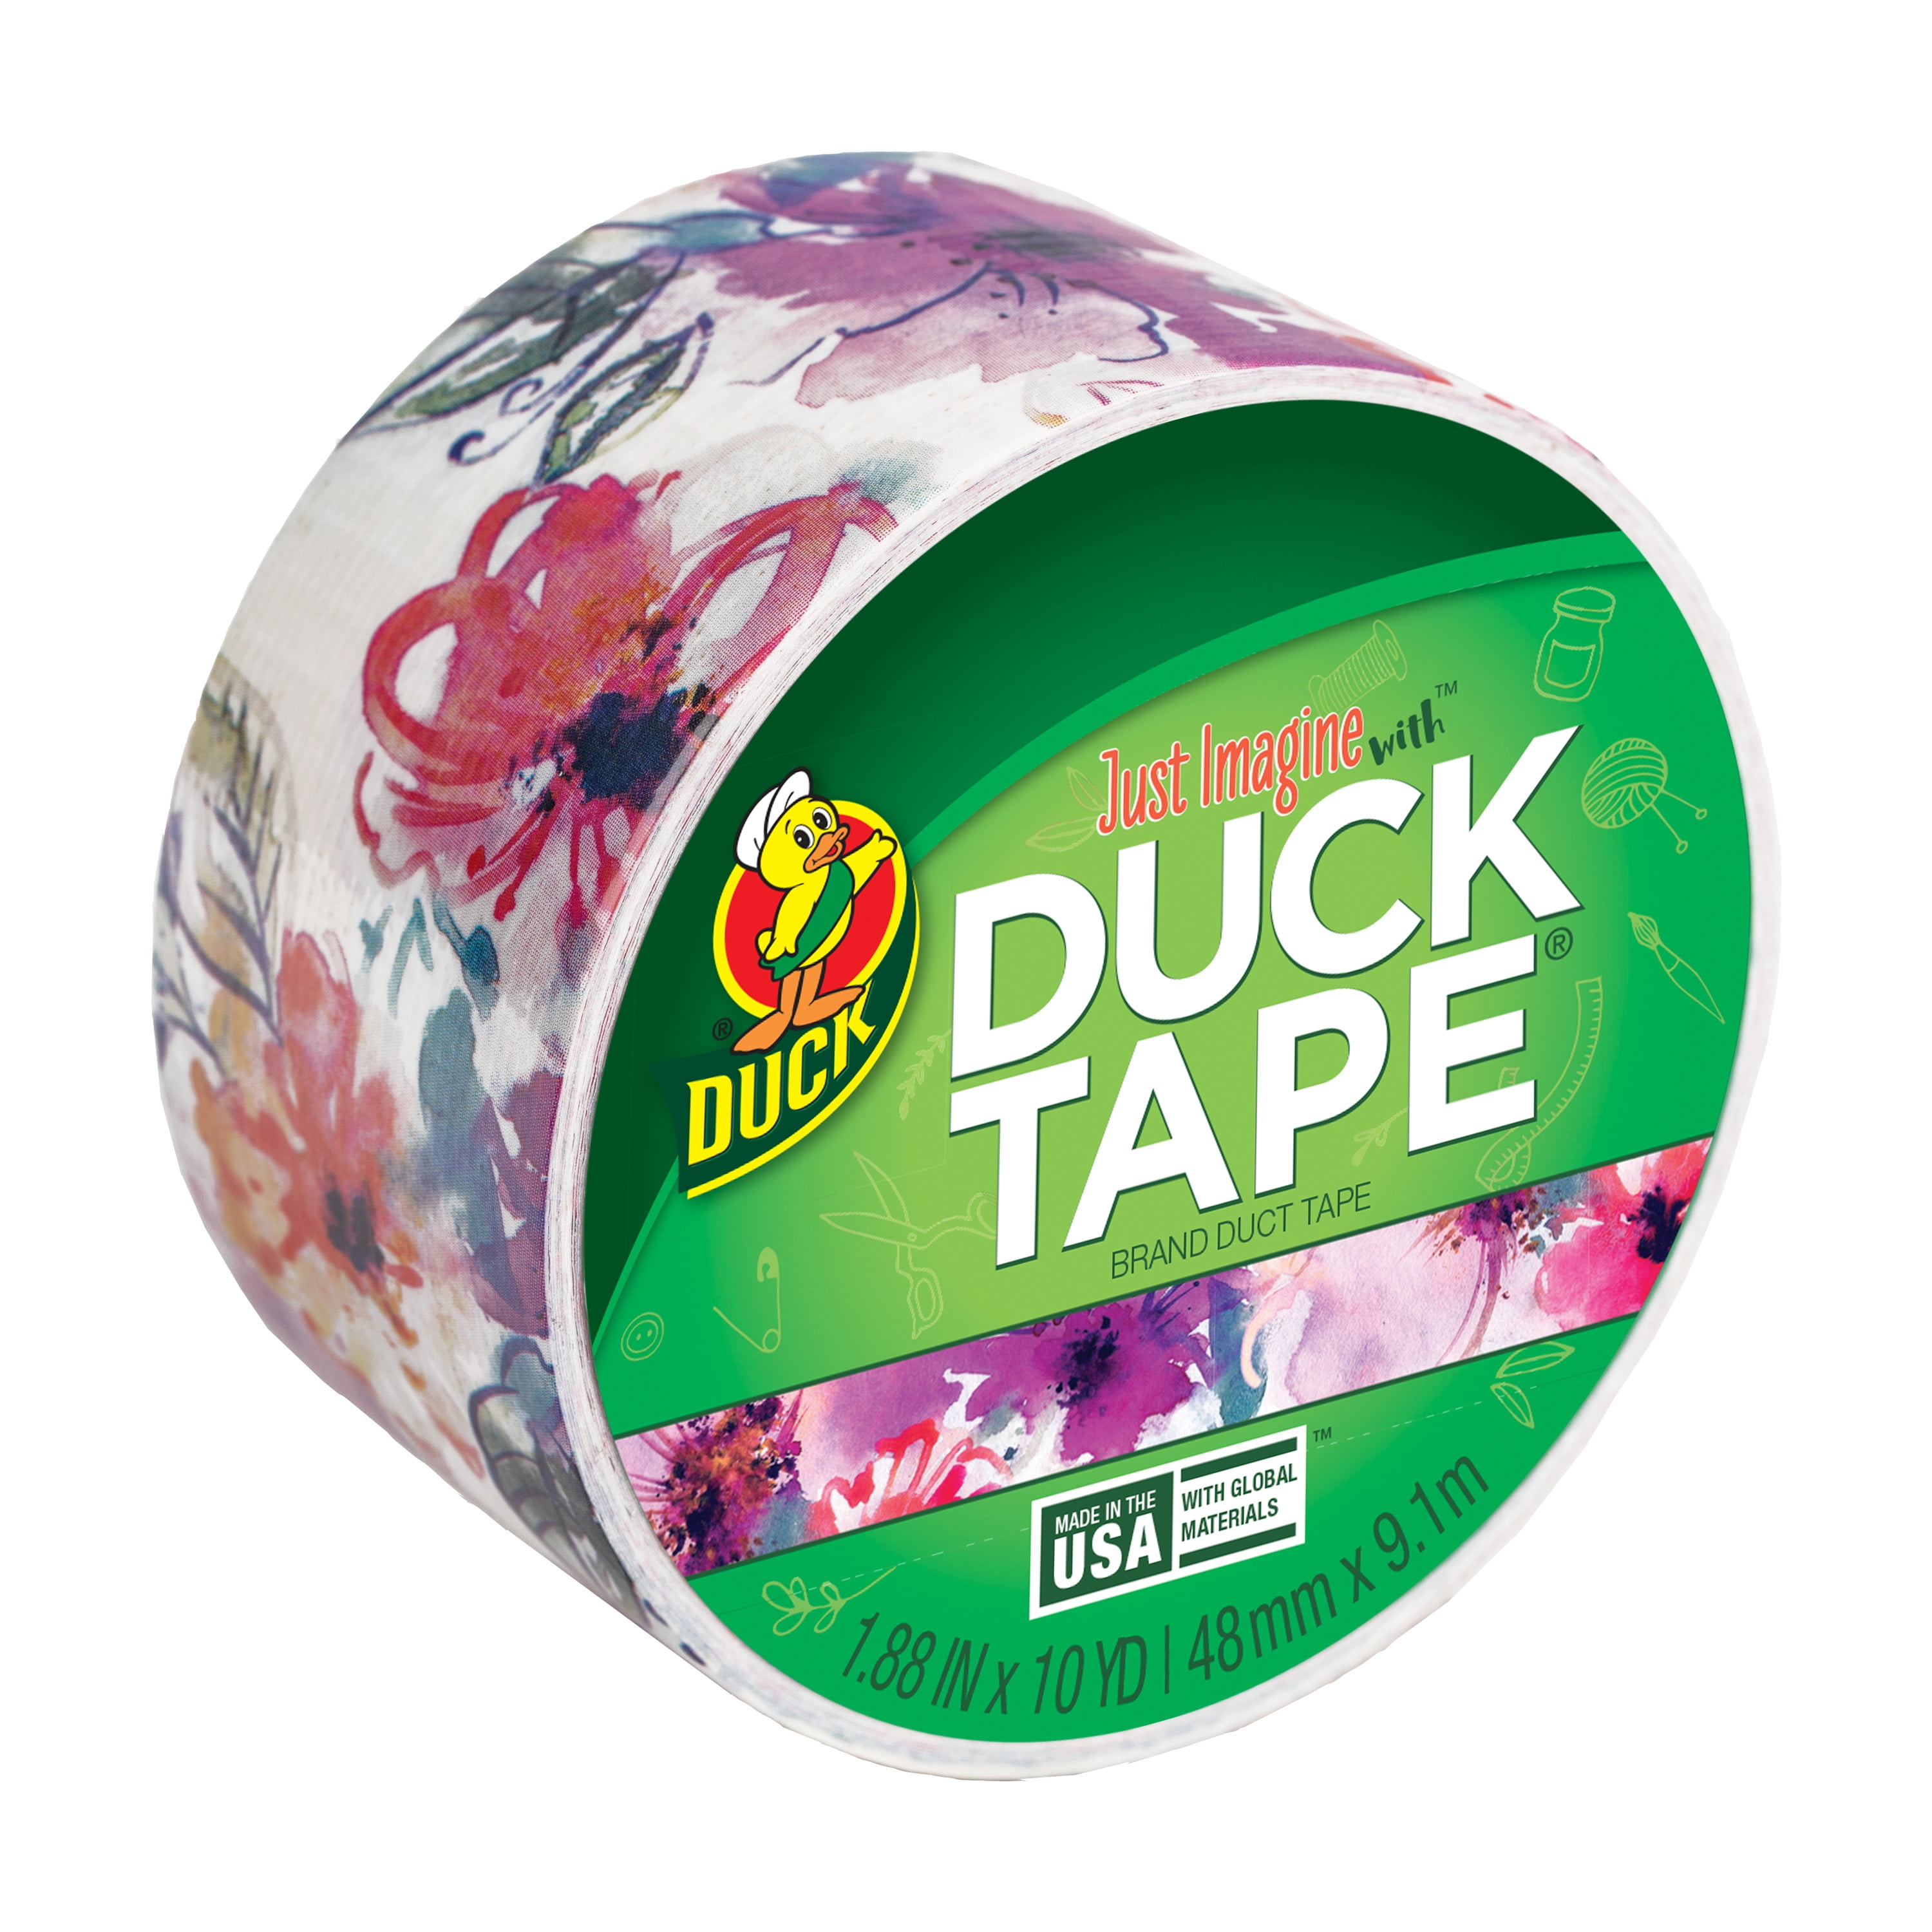 Printed Duct Tape